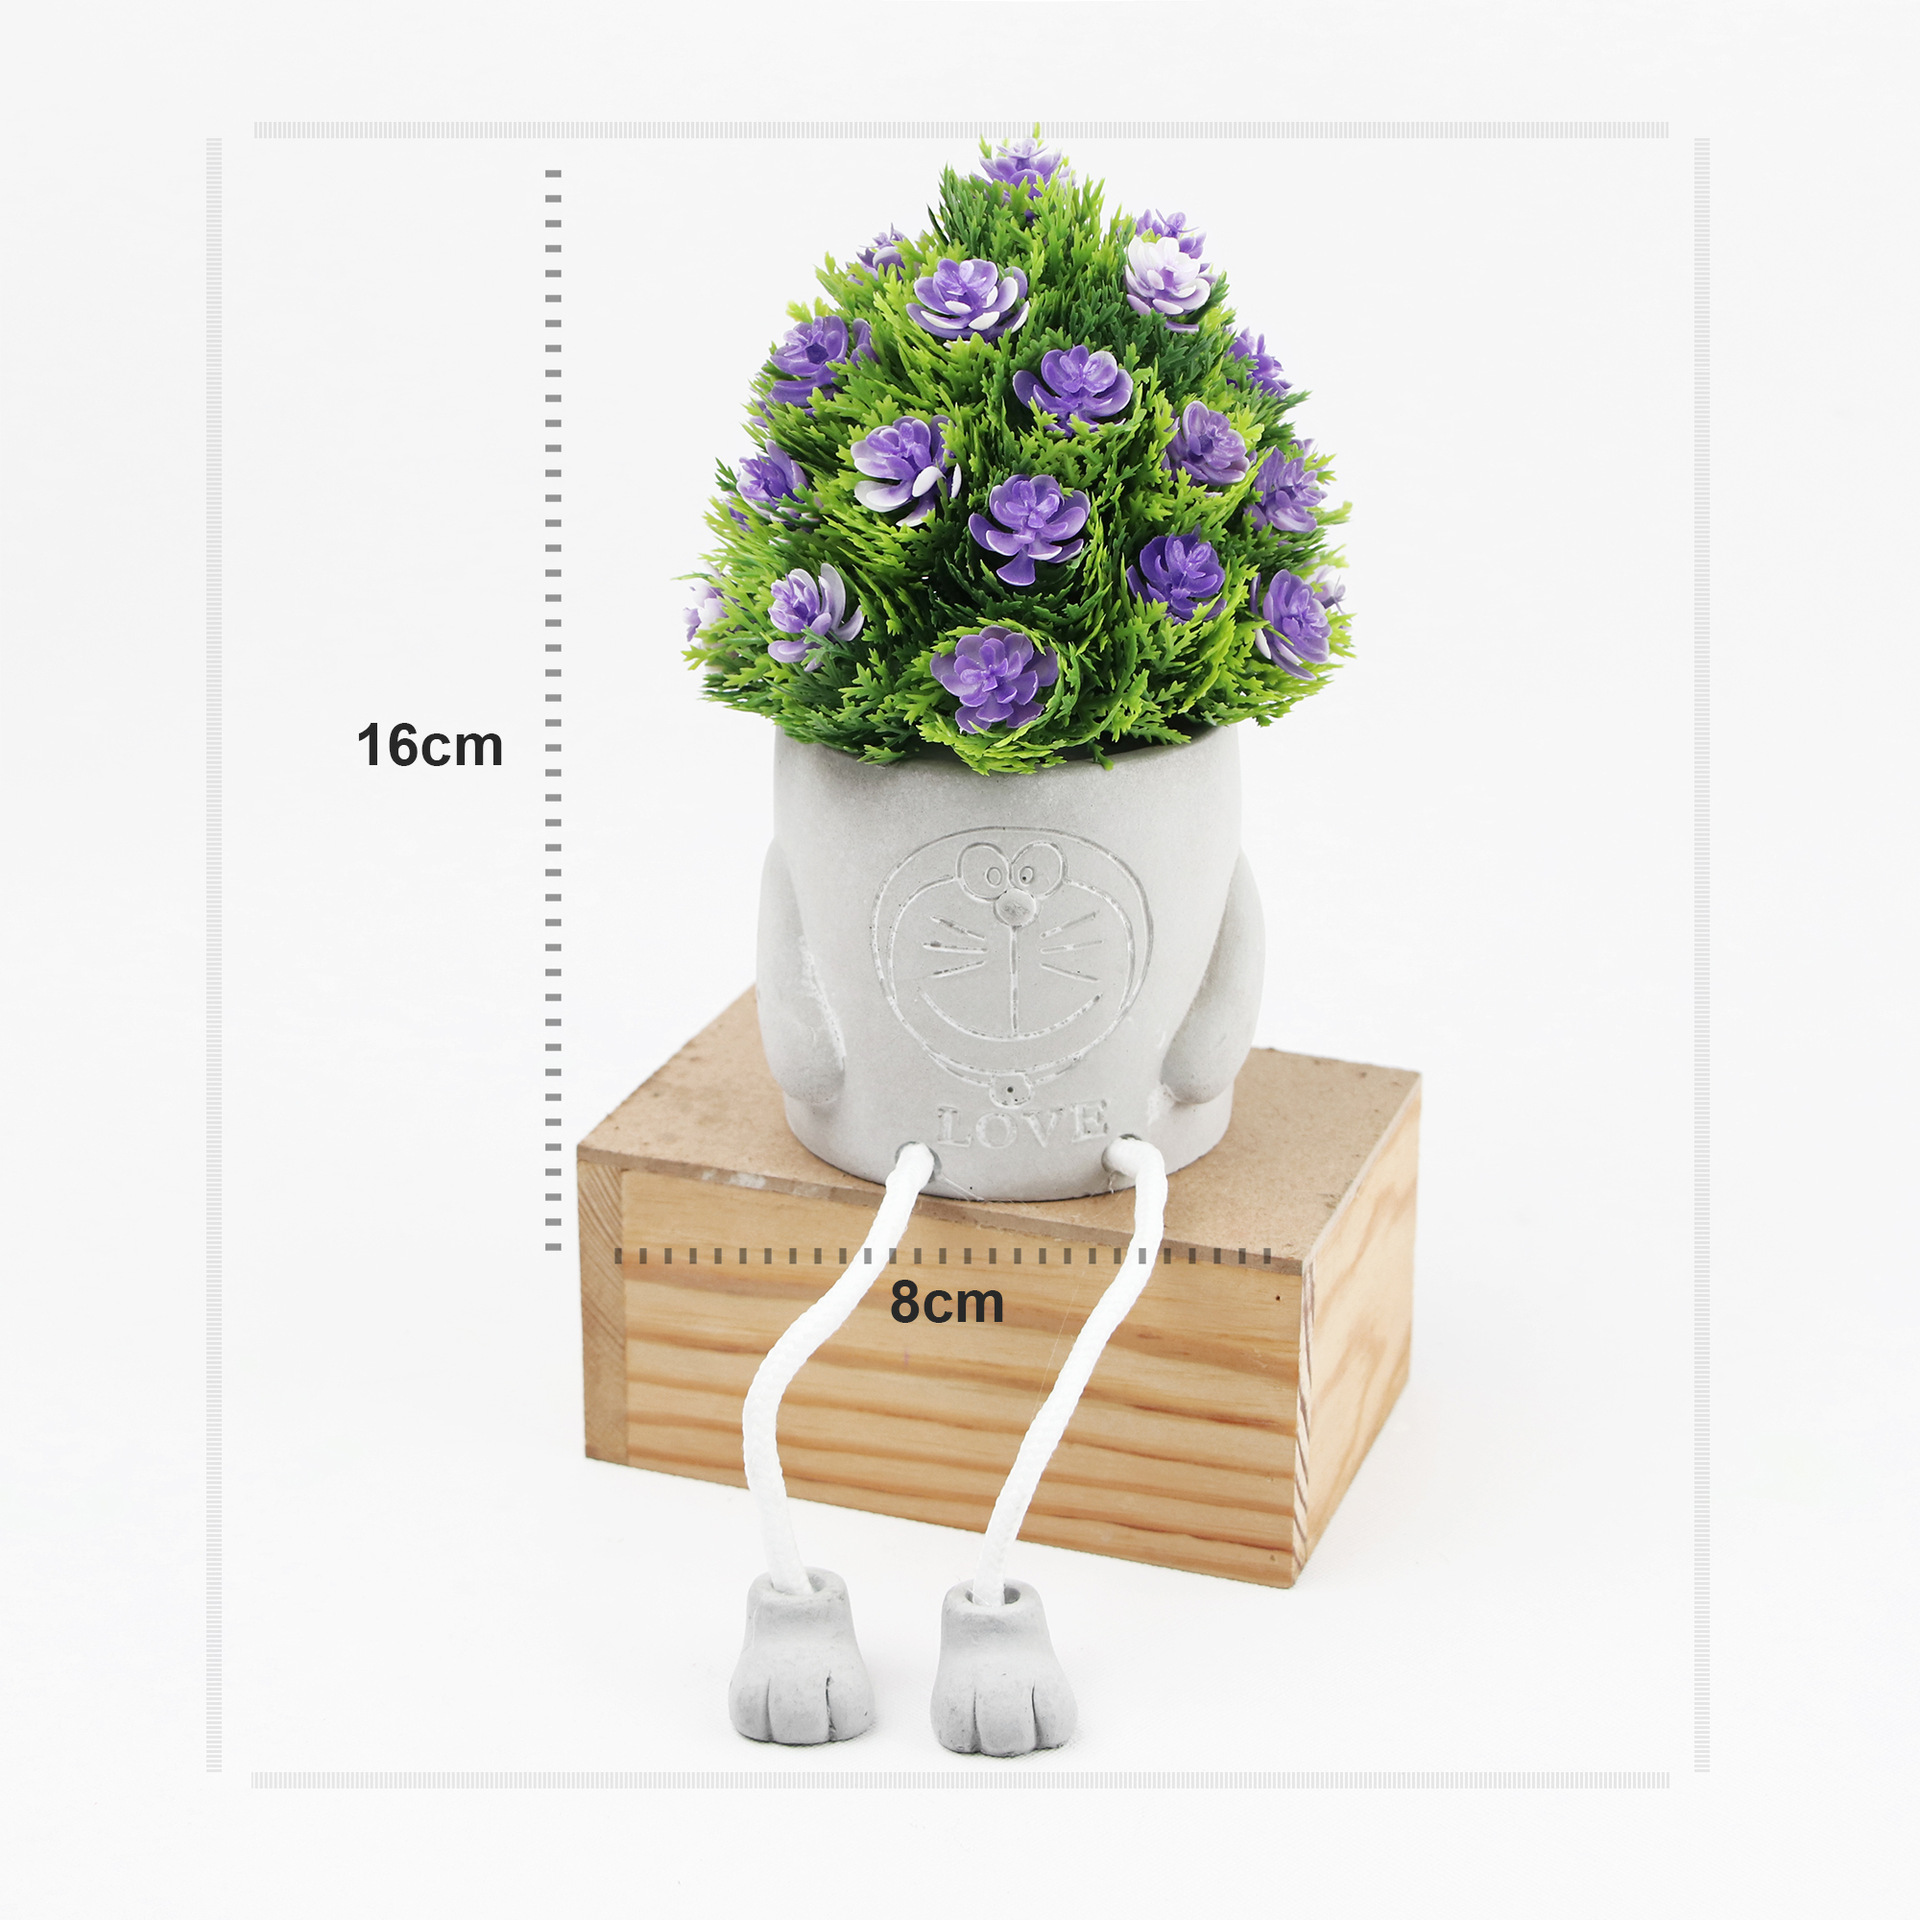 Nordic Instagram Style Potted Creative Office Desk Surface Panel Hanging Feet Doll Fake Green Plant Fake Flower Decoration Ornaments Bonsai